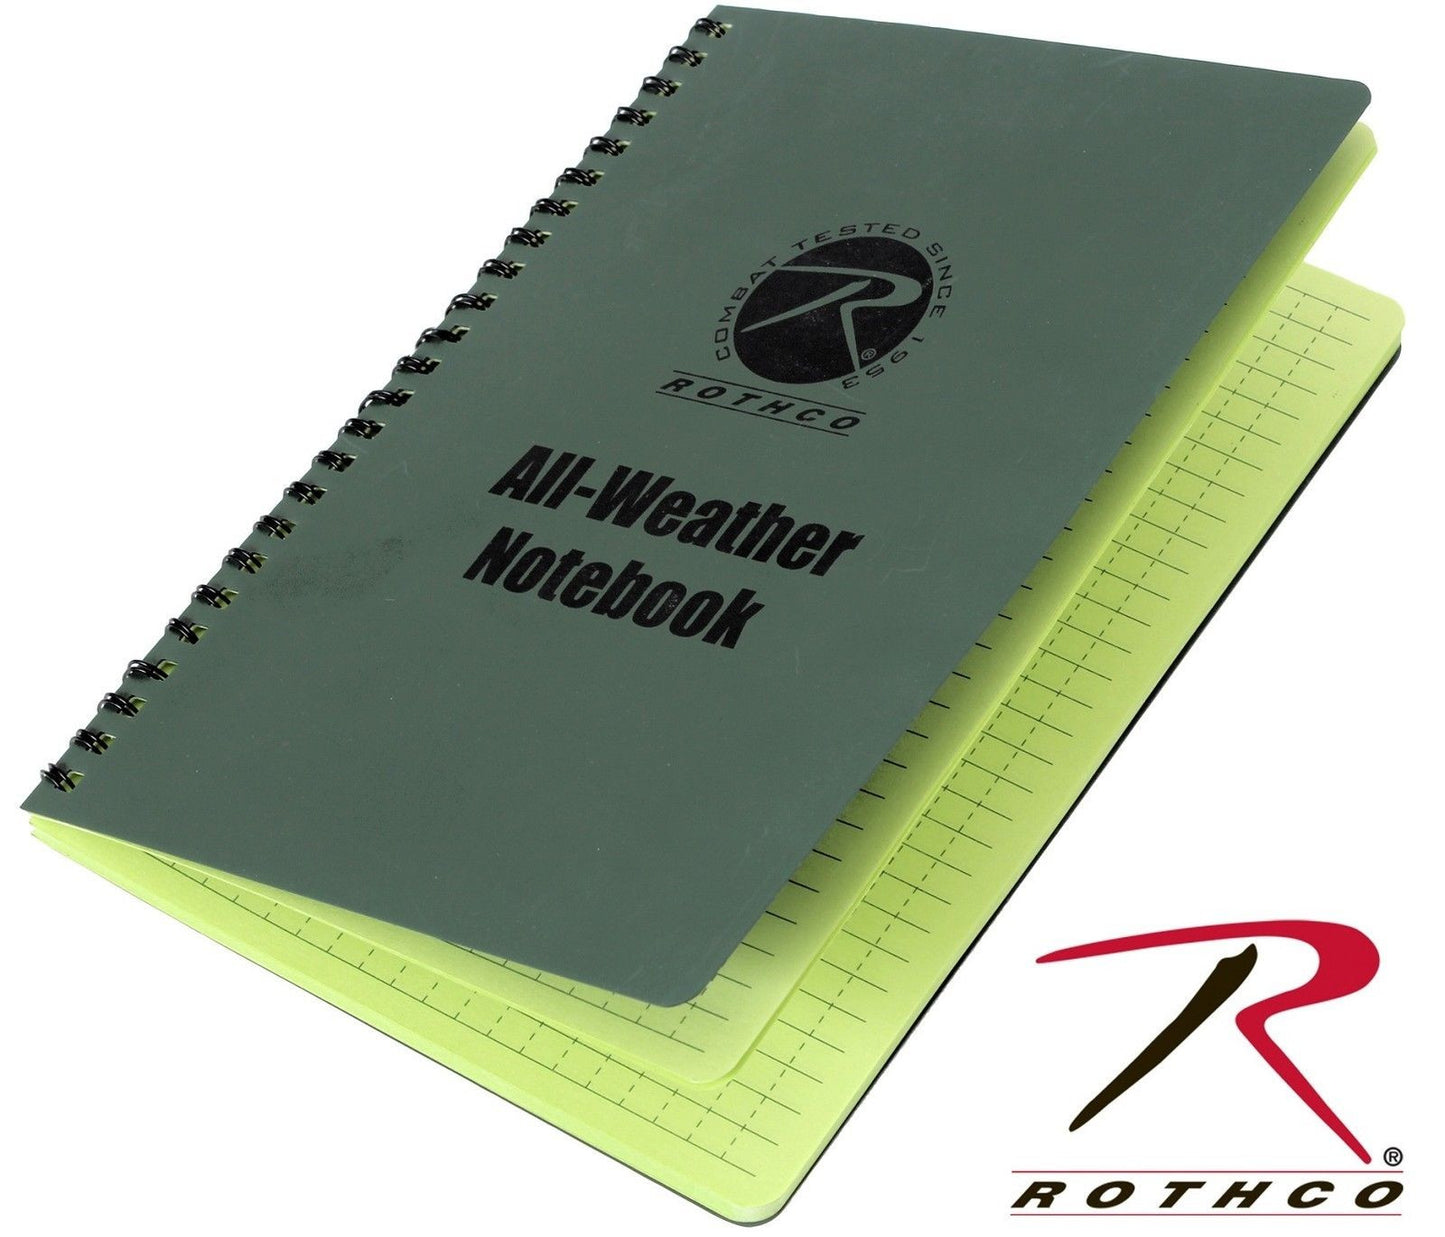 Rothco All Weather Waterproof Notebook - 48 Sheets Camping & Hiking Note Book